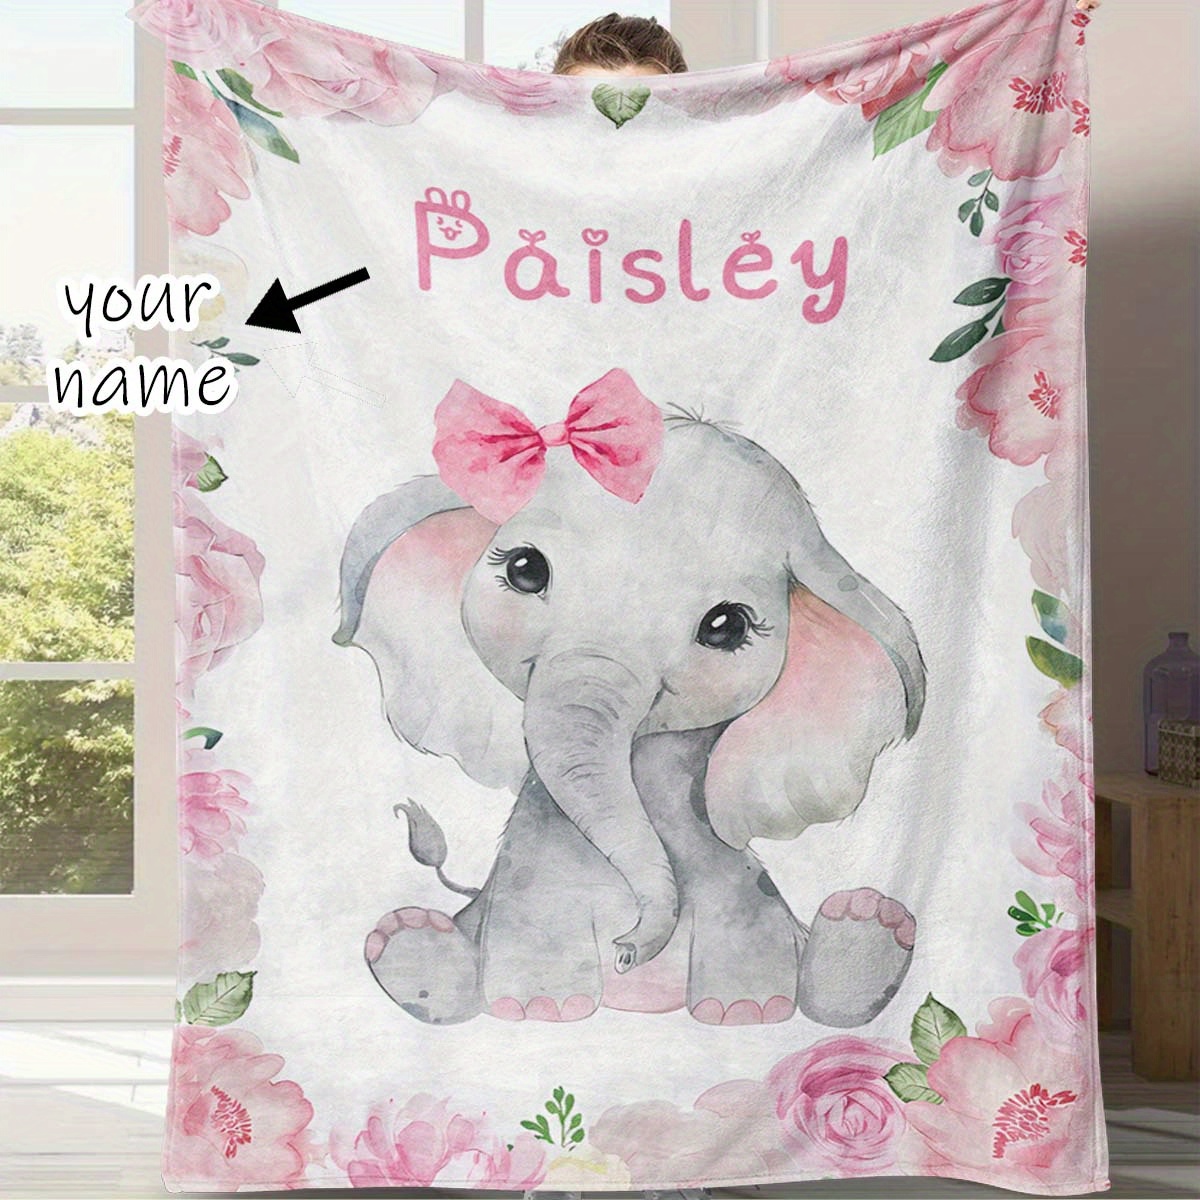 

1pc Customized Name Blanket, Cute Elephant Rose Pattern Blanket, For Birthday Holiday Gift, Soft 4 Seasons Flannel Outdoor Blanket